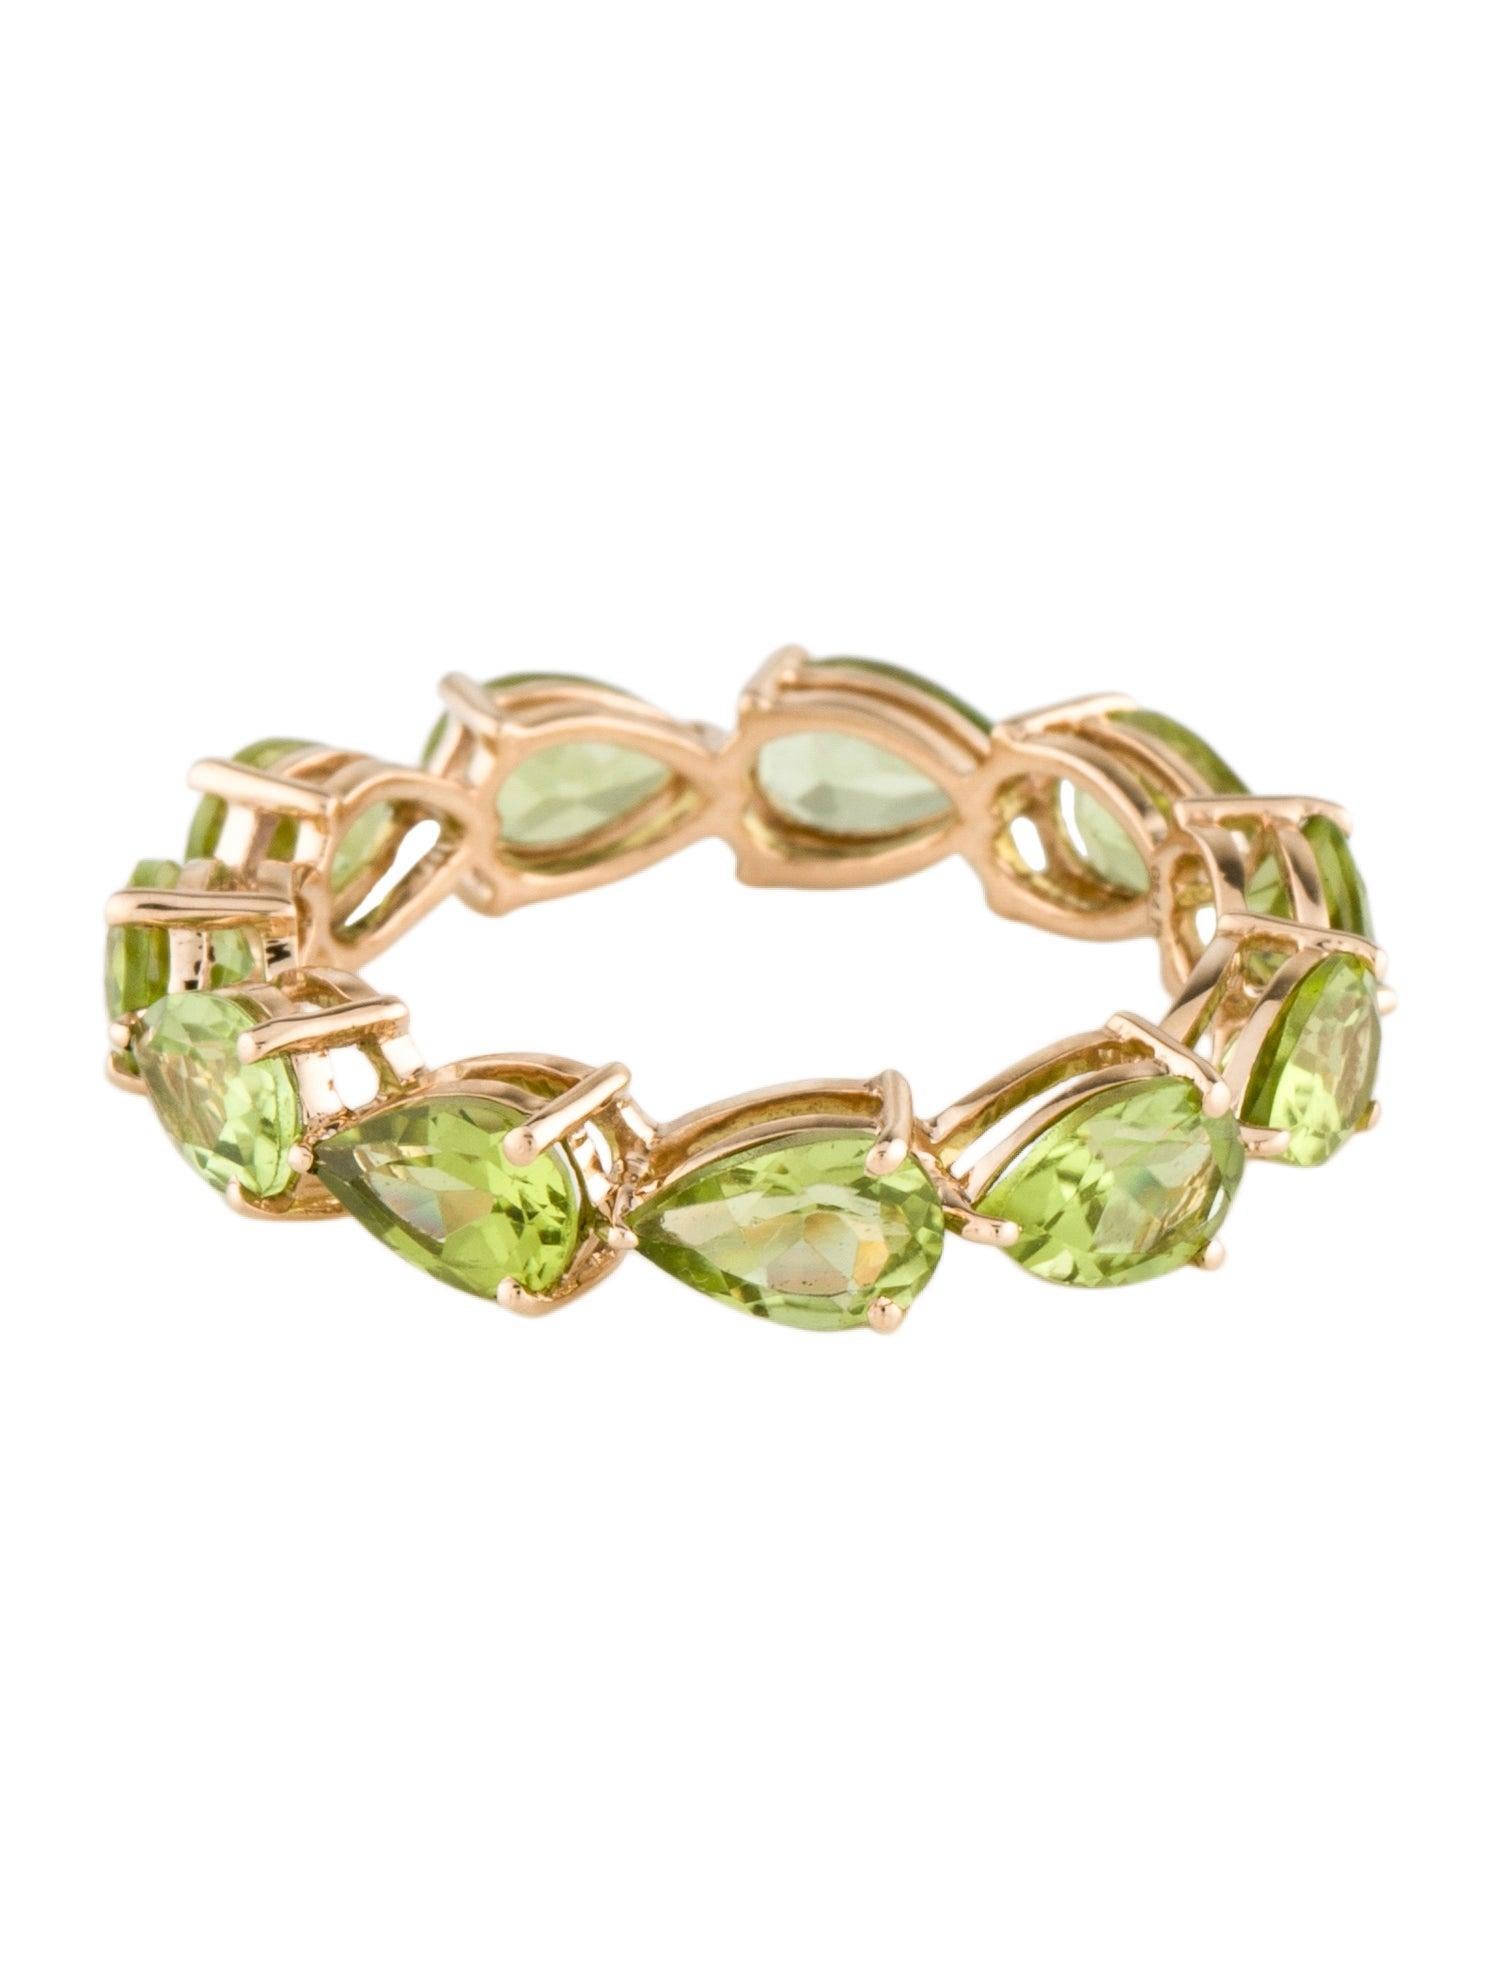 14K Yellow Gold 4.70ctw Pear Modified Brilliant Peridot Eternity Band, Size 7.75 In New Condition For Sale In Holtsville, NY